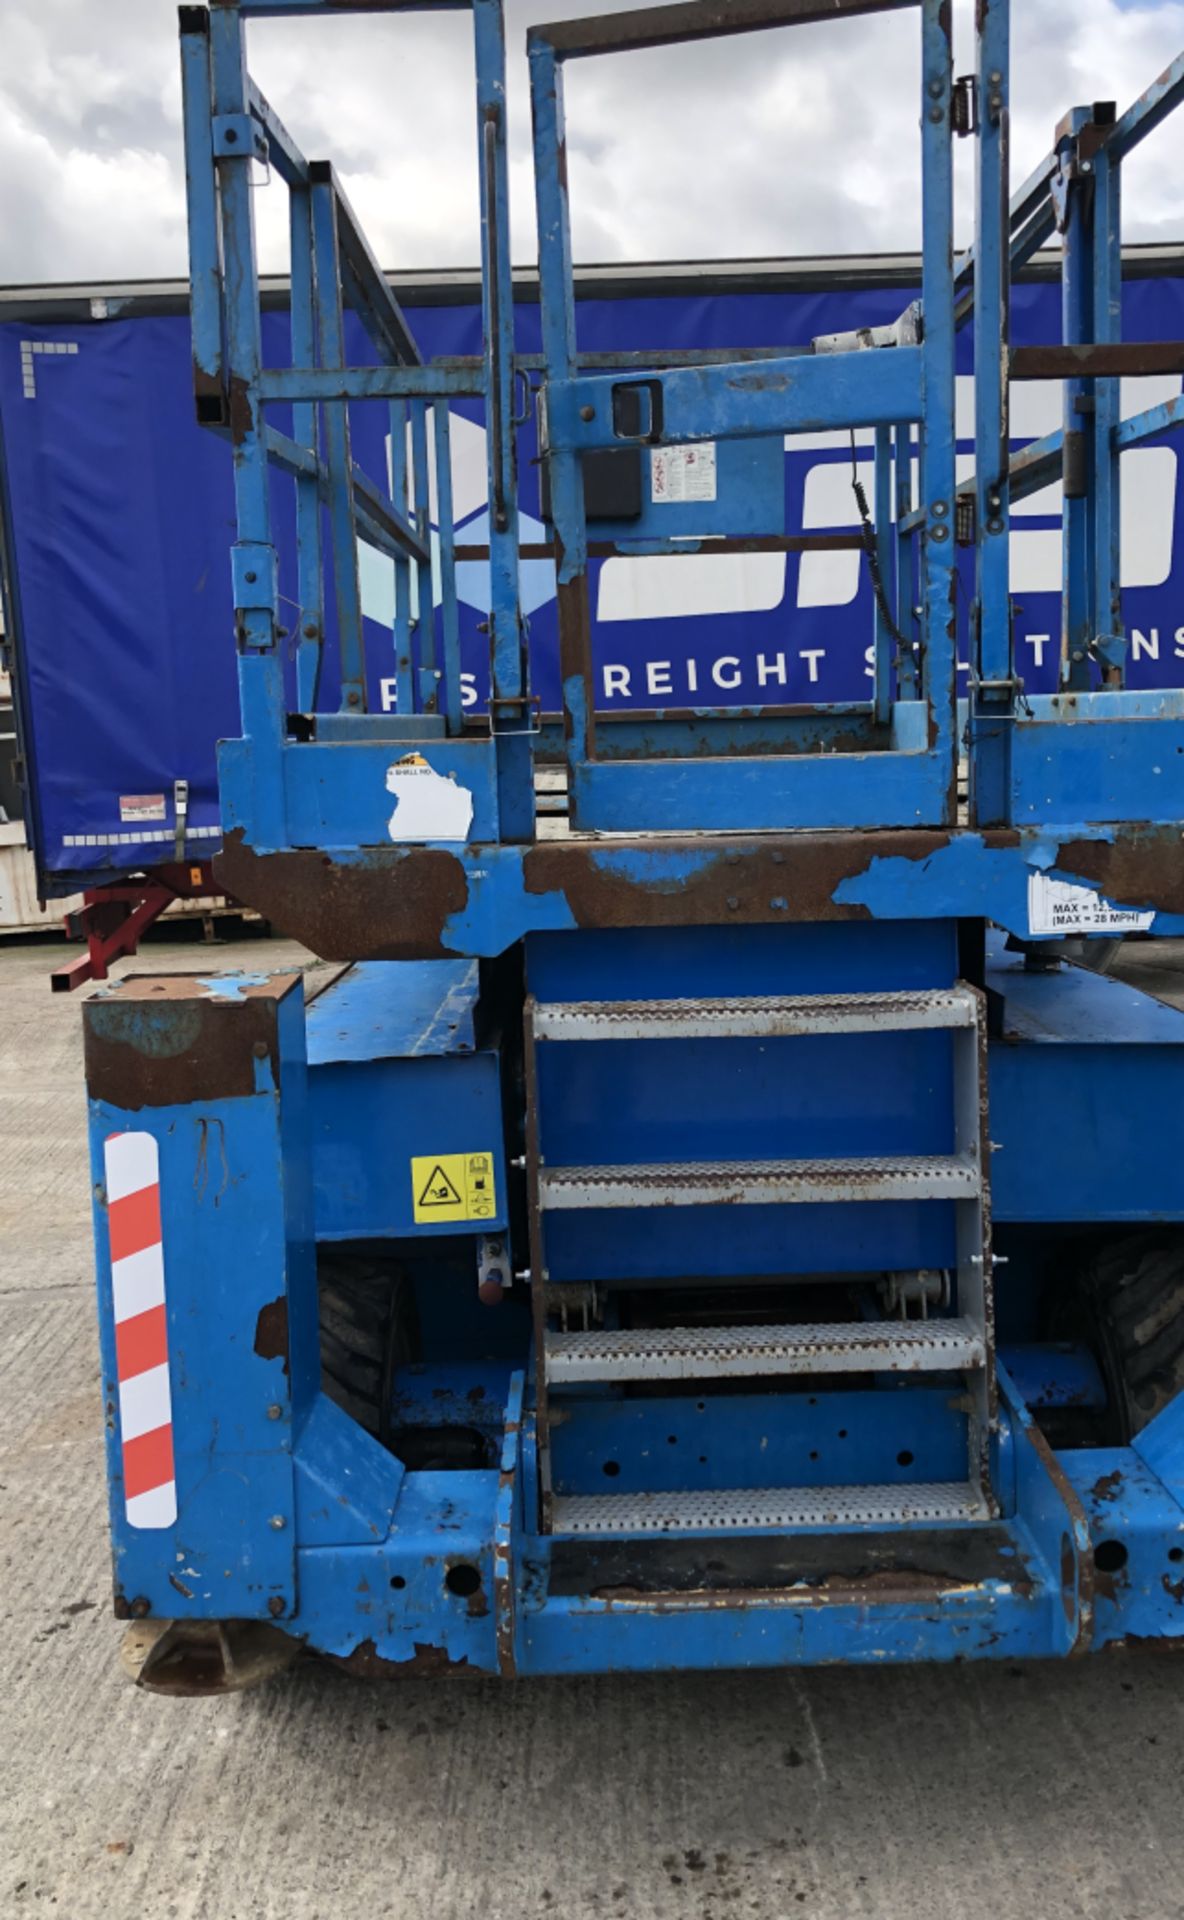 4×4 SIZZLER LIFT | 10M LIFT 2008 GENIE GS 2668 RT - Image 2 of 15